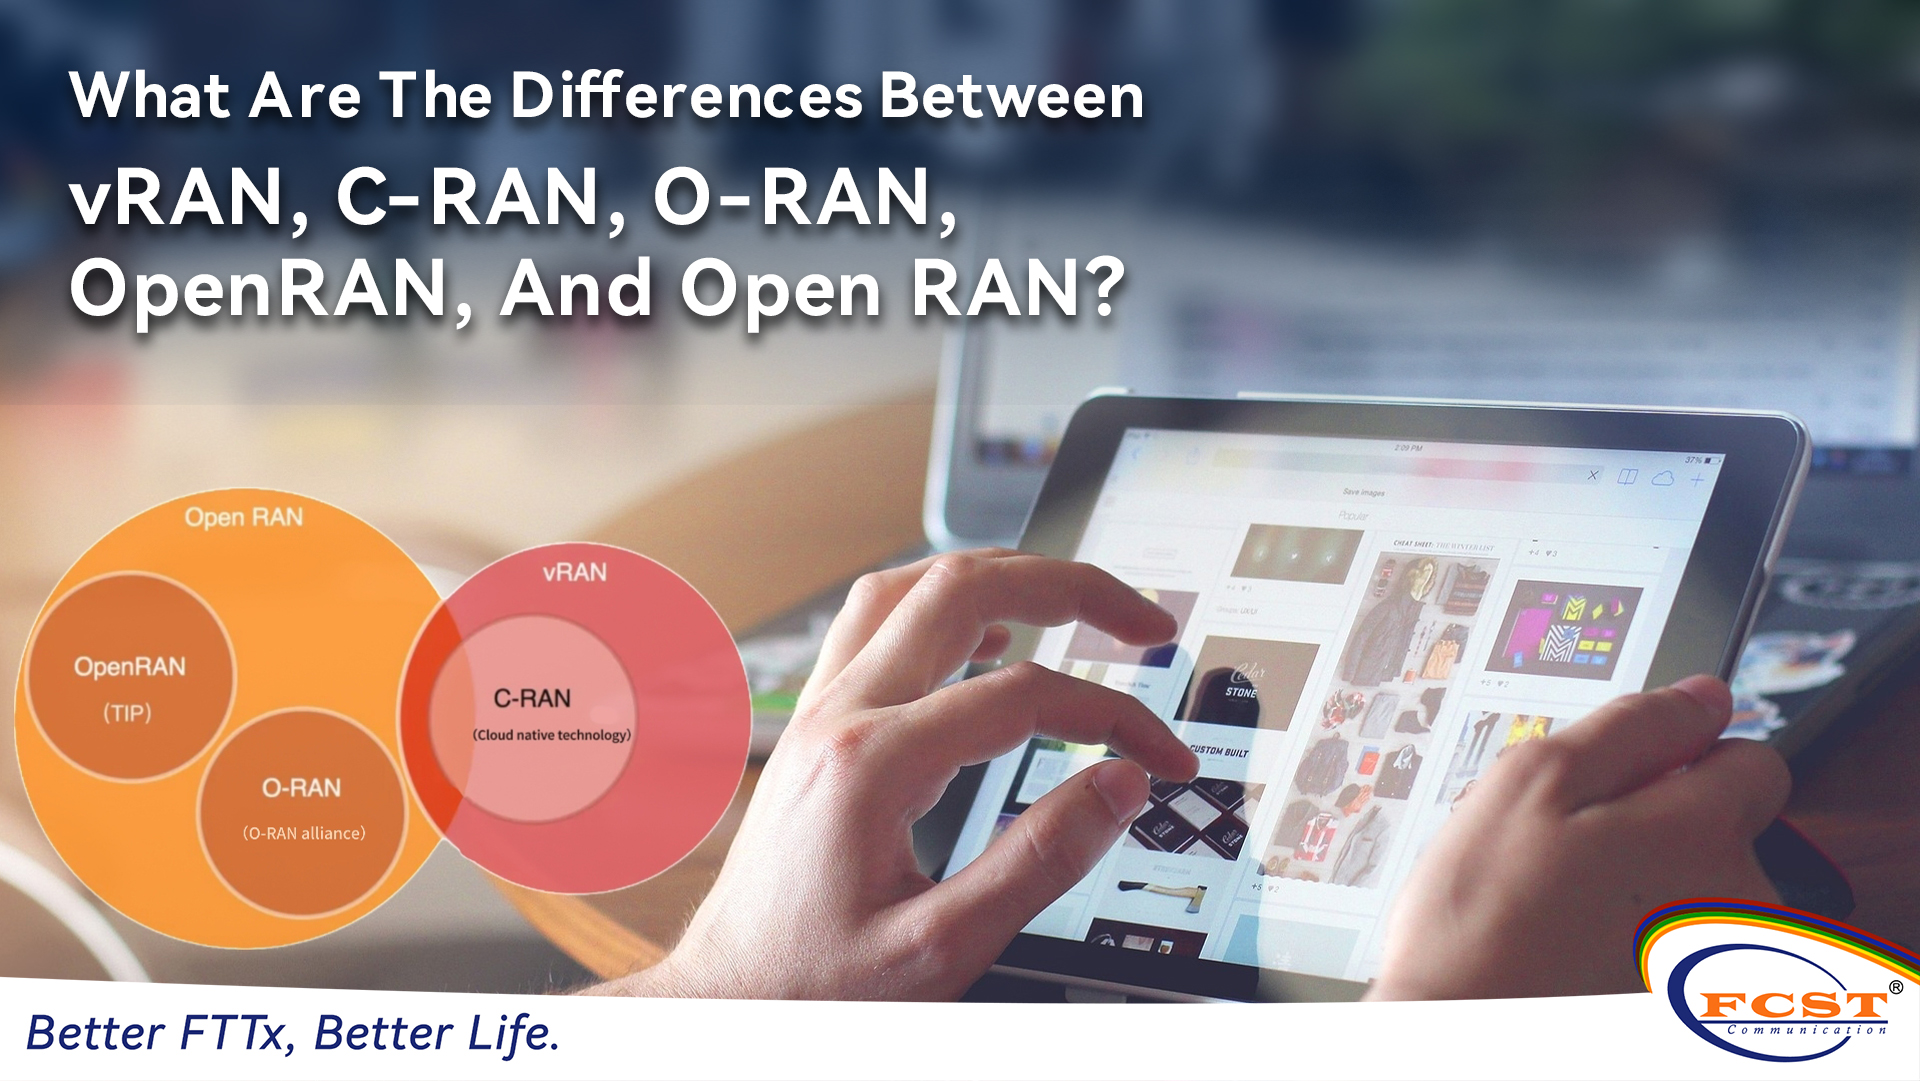 What Are The Differences Between vRAN, C-RAN, O-RAN, OpenRAN, And Open RAN?